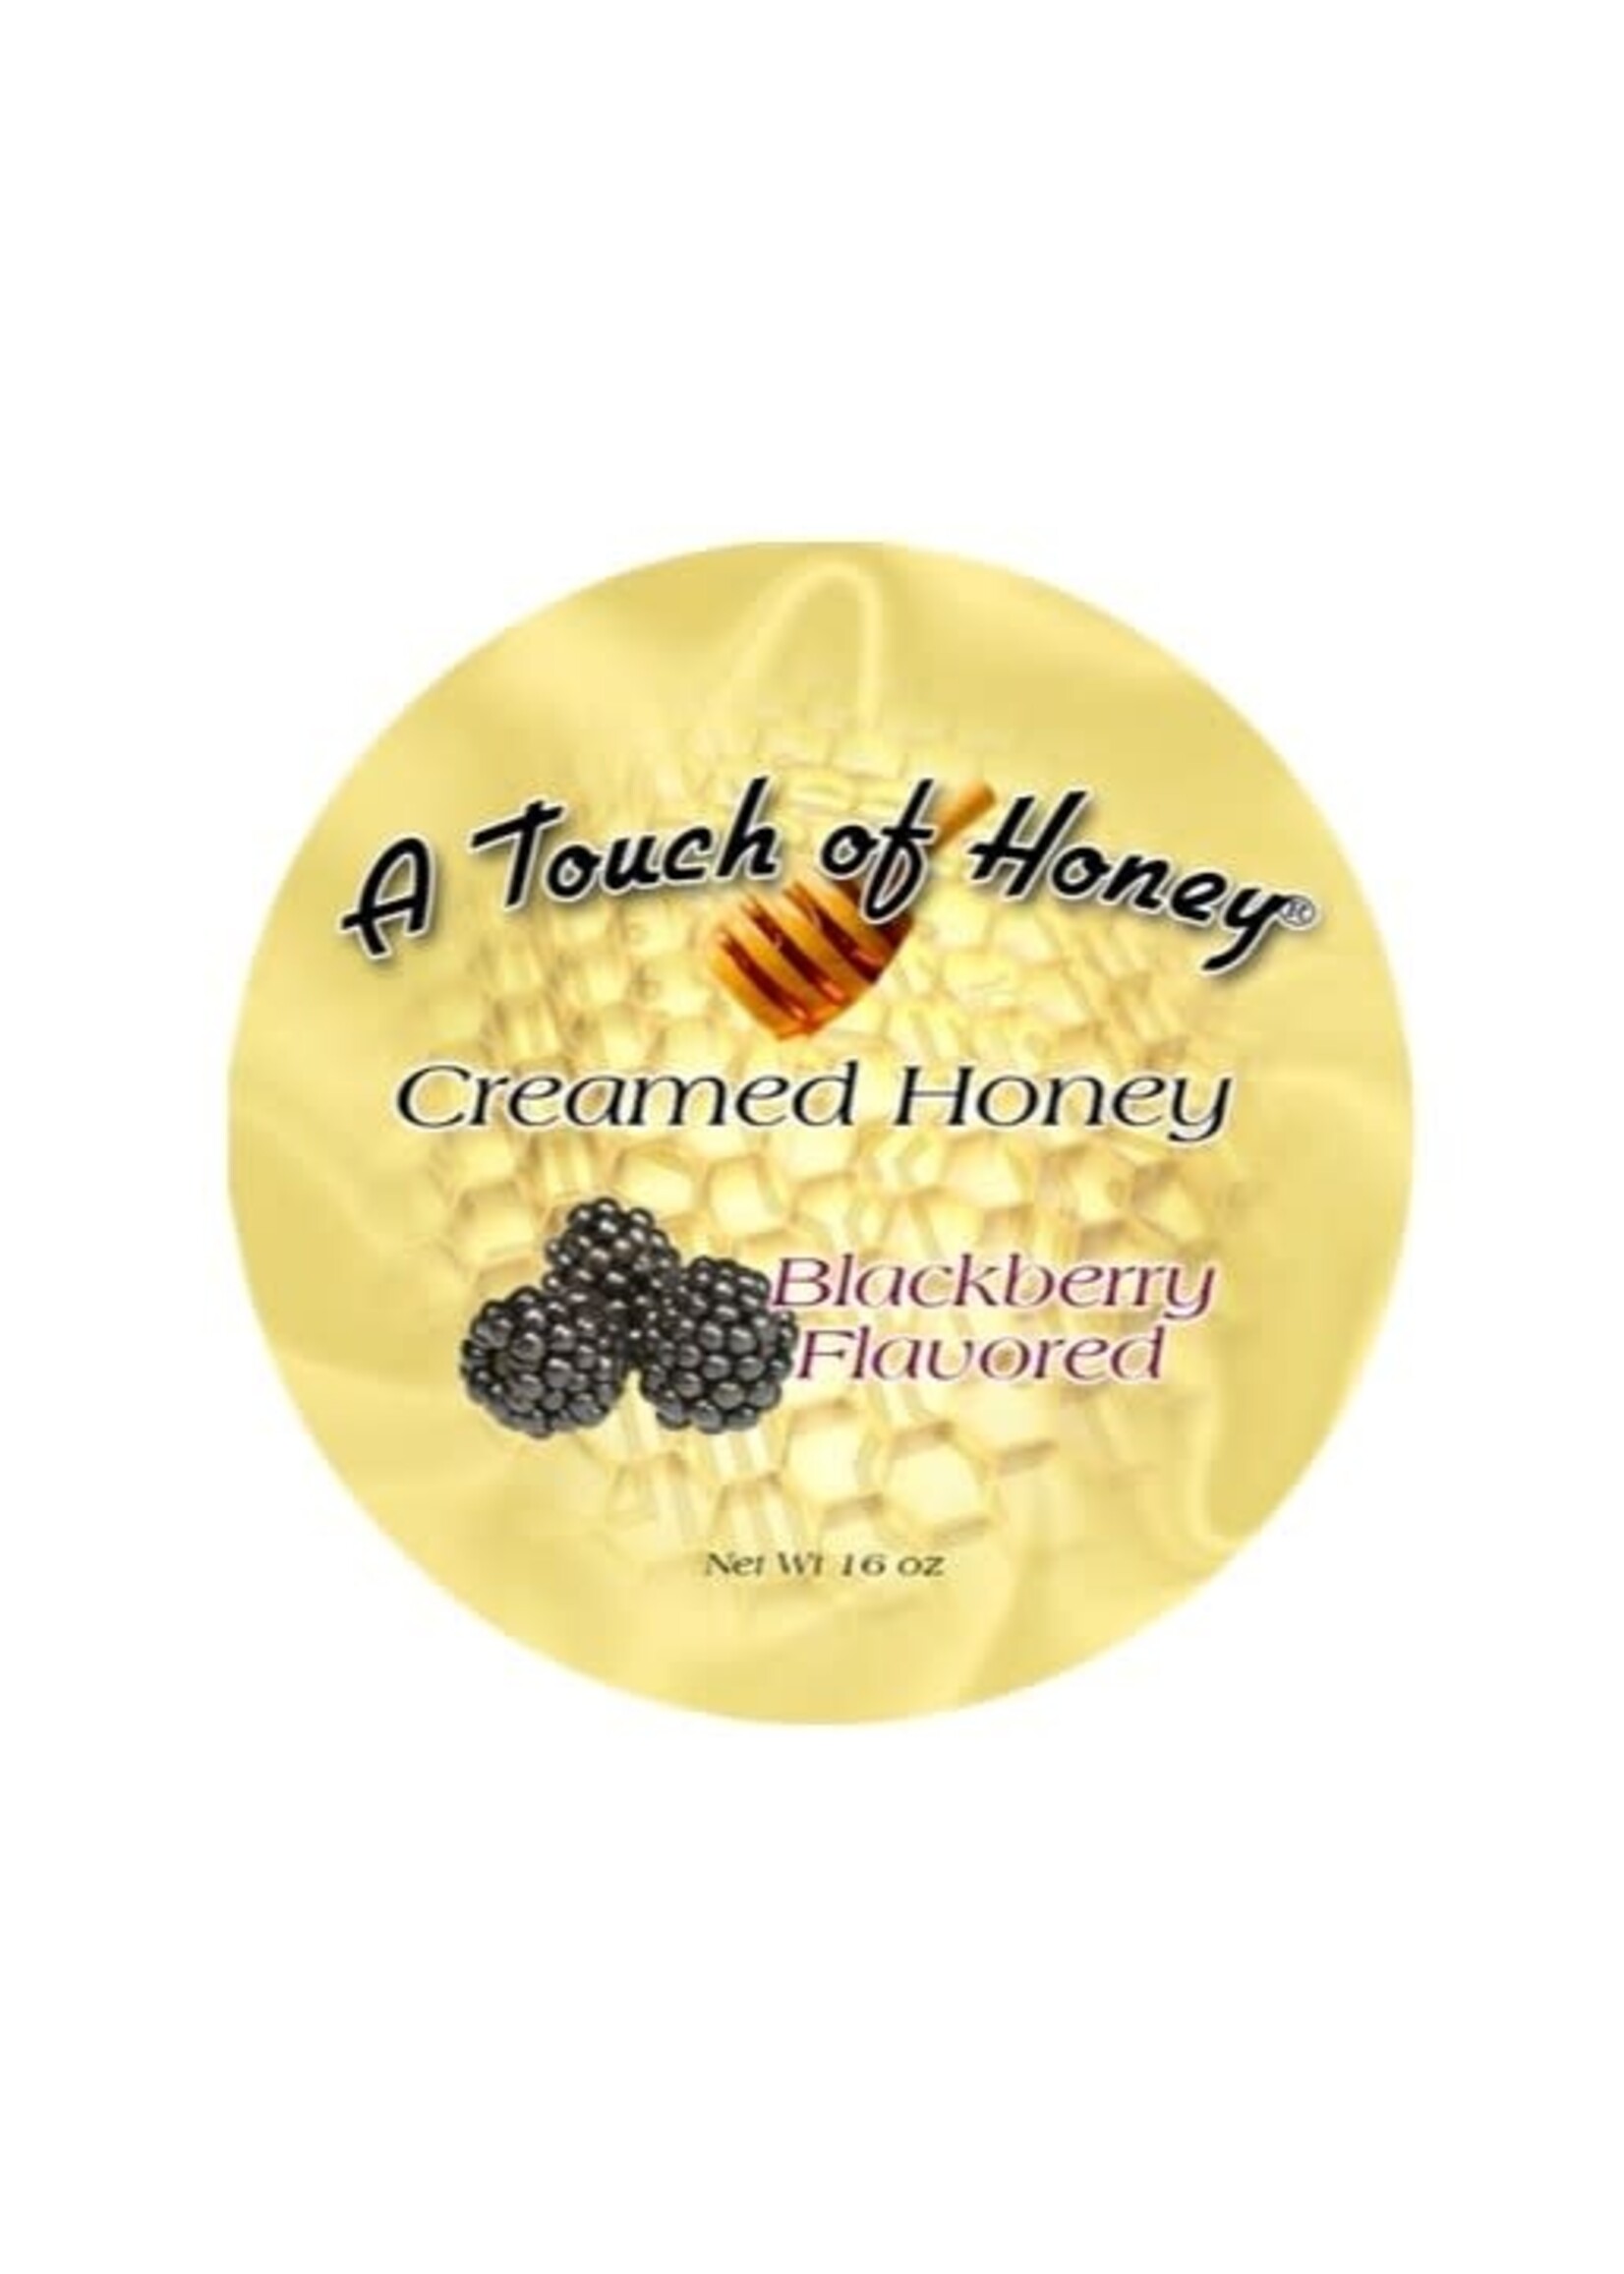 A Touch of Honey Blackberry Flavored Creamed Honey